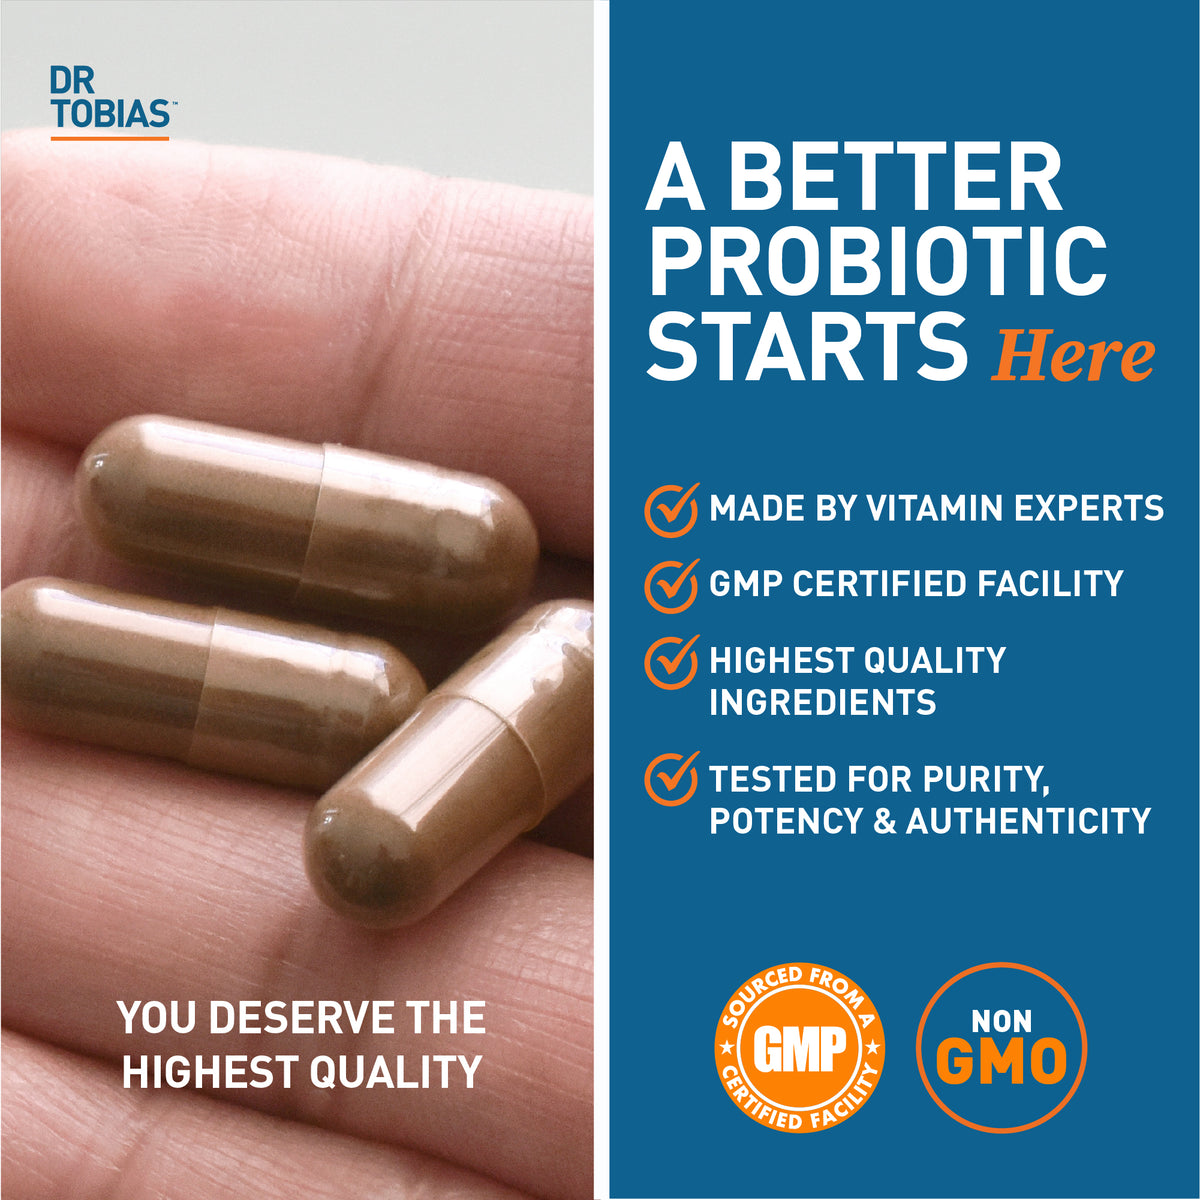 a better probiotic starts here that is made by vitamin experts, gmp certified facility, highest uality ingredients and tested for purity, potency and authenticity 